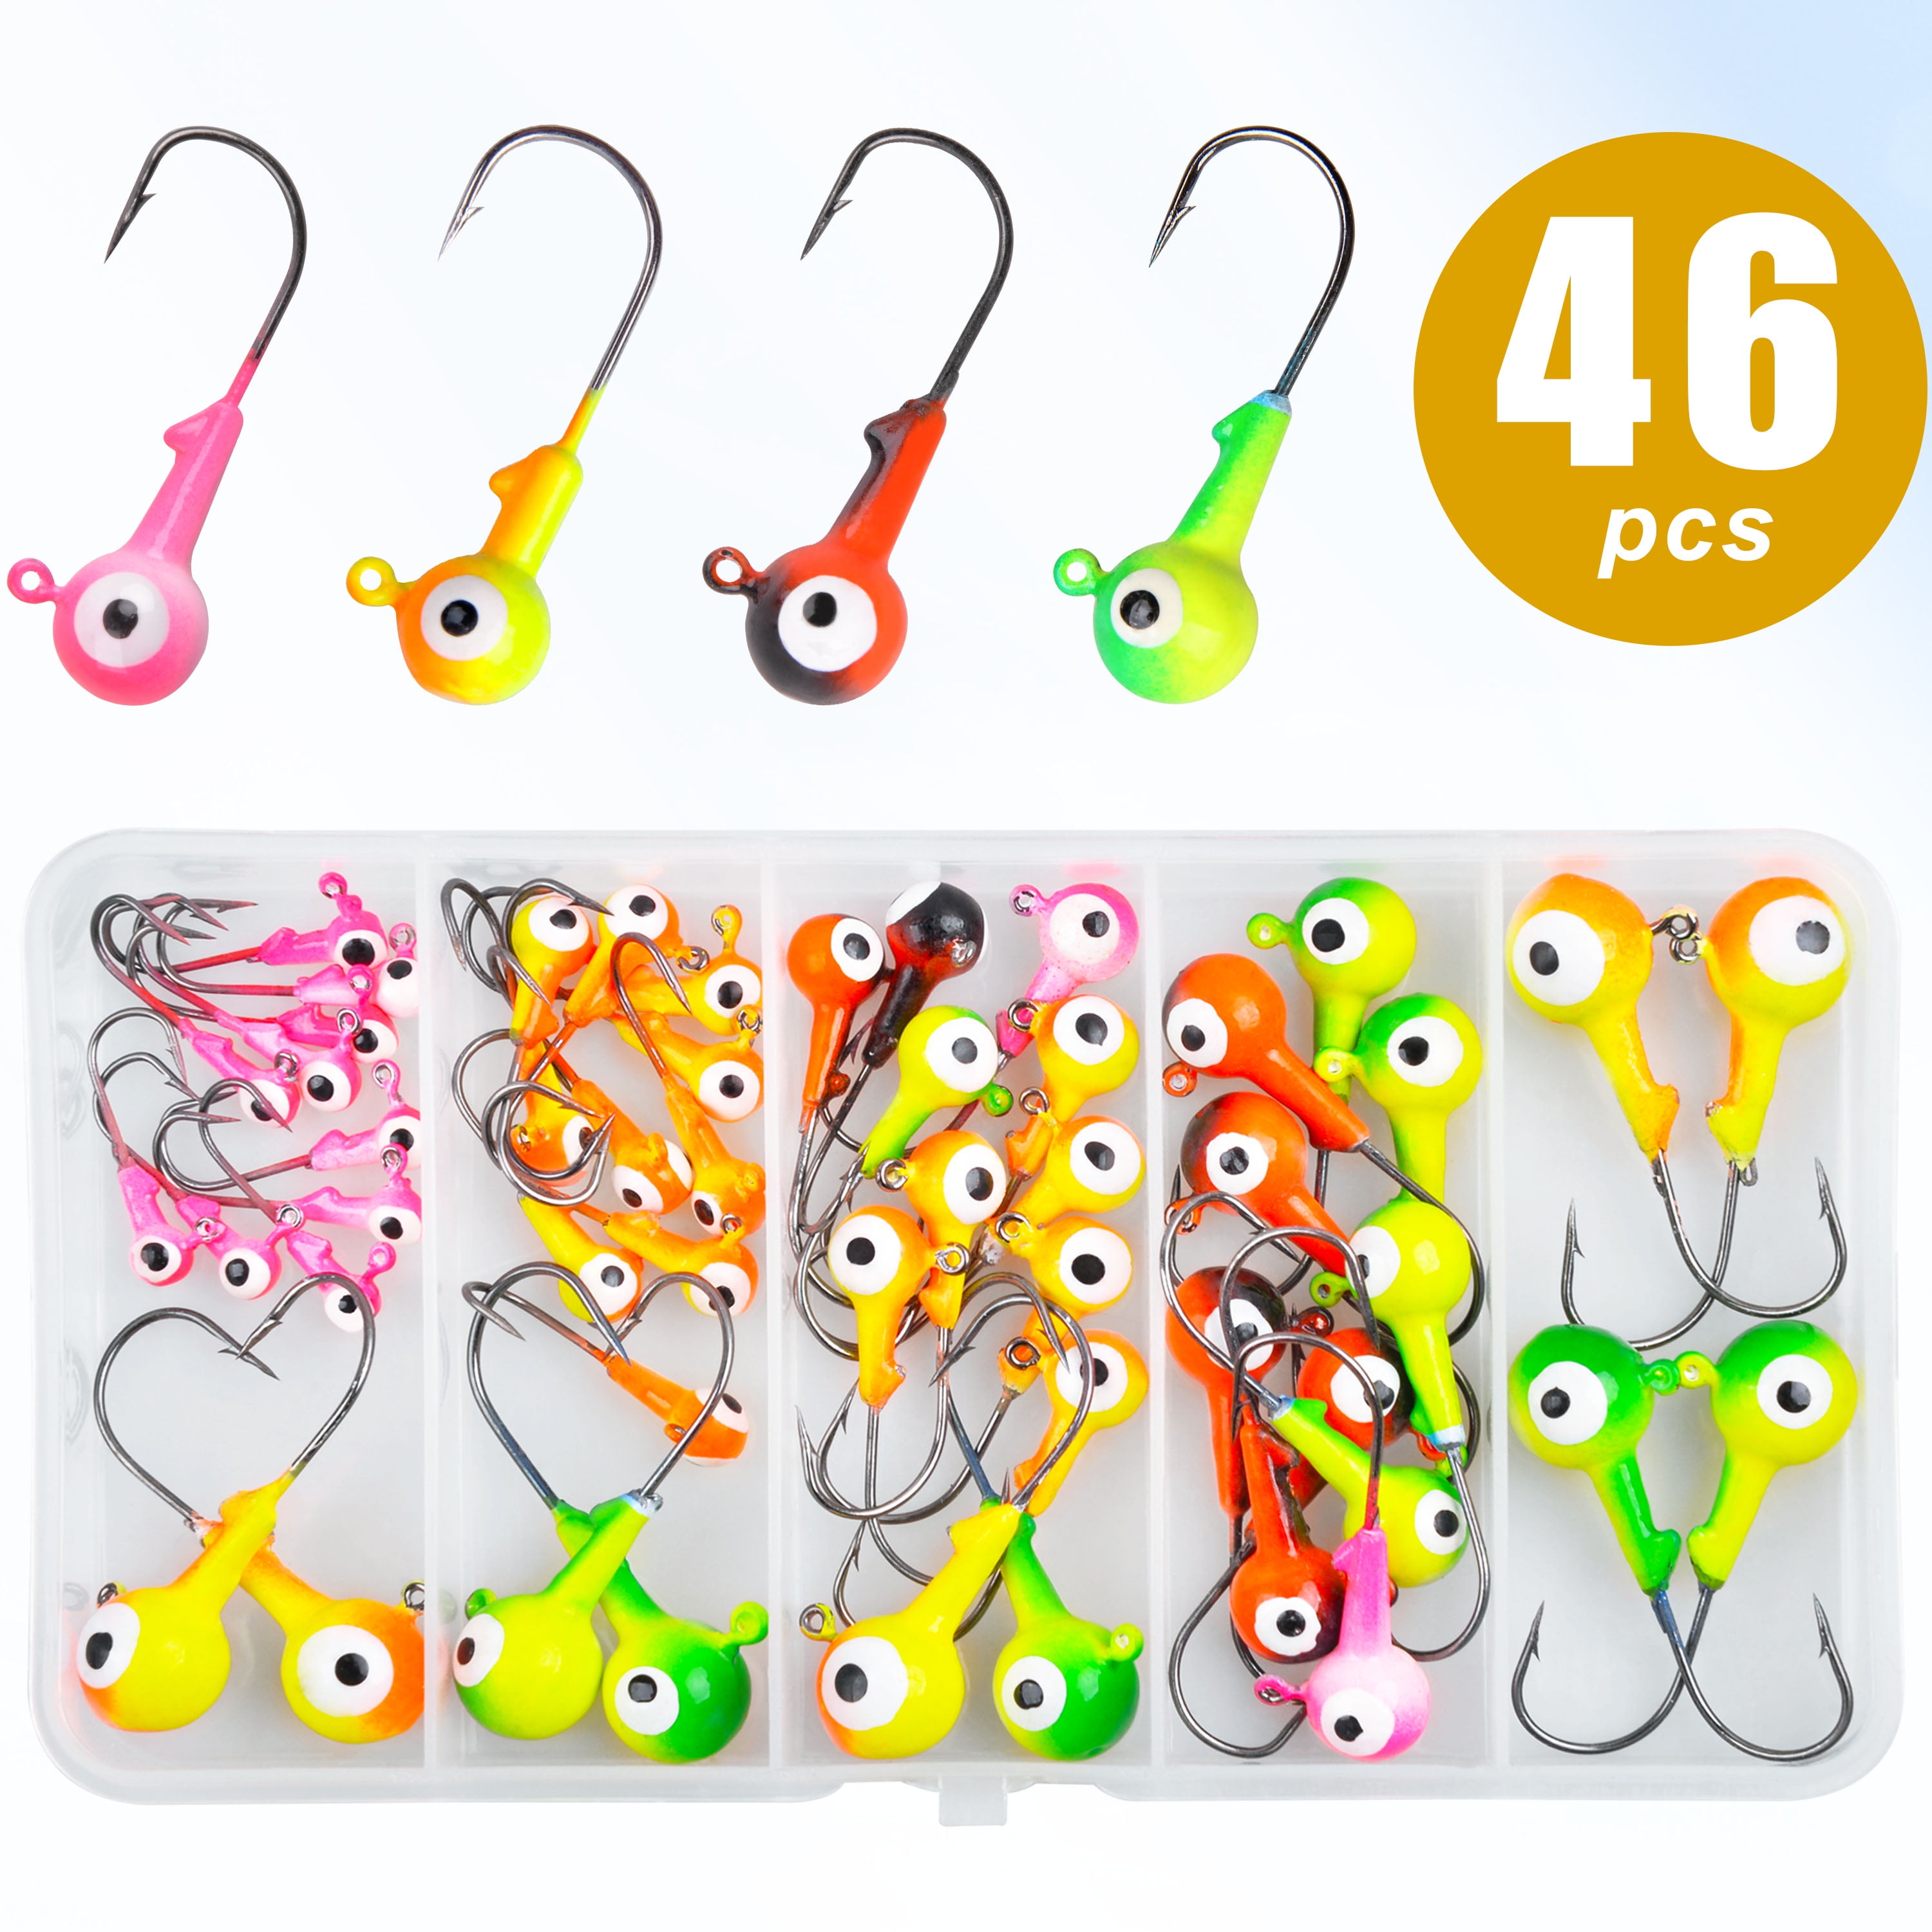 Jig Heads for Fishing Crappie Jig Heads Lures 46pcs Round Ball Head Fishing  Hooks Assorted Double Eye Fishing Jig Hooks Kit for Bass Trout Crappie